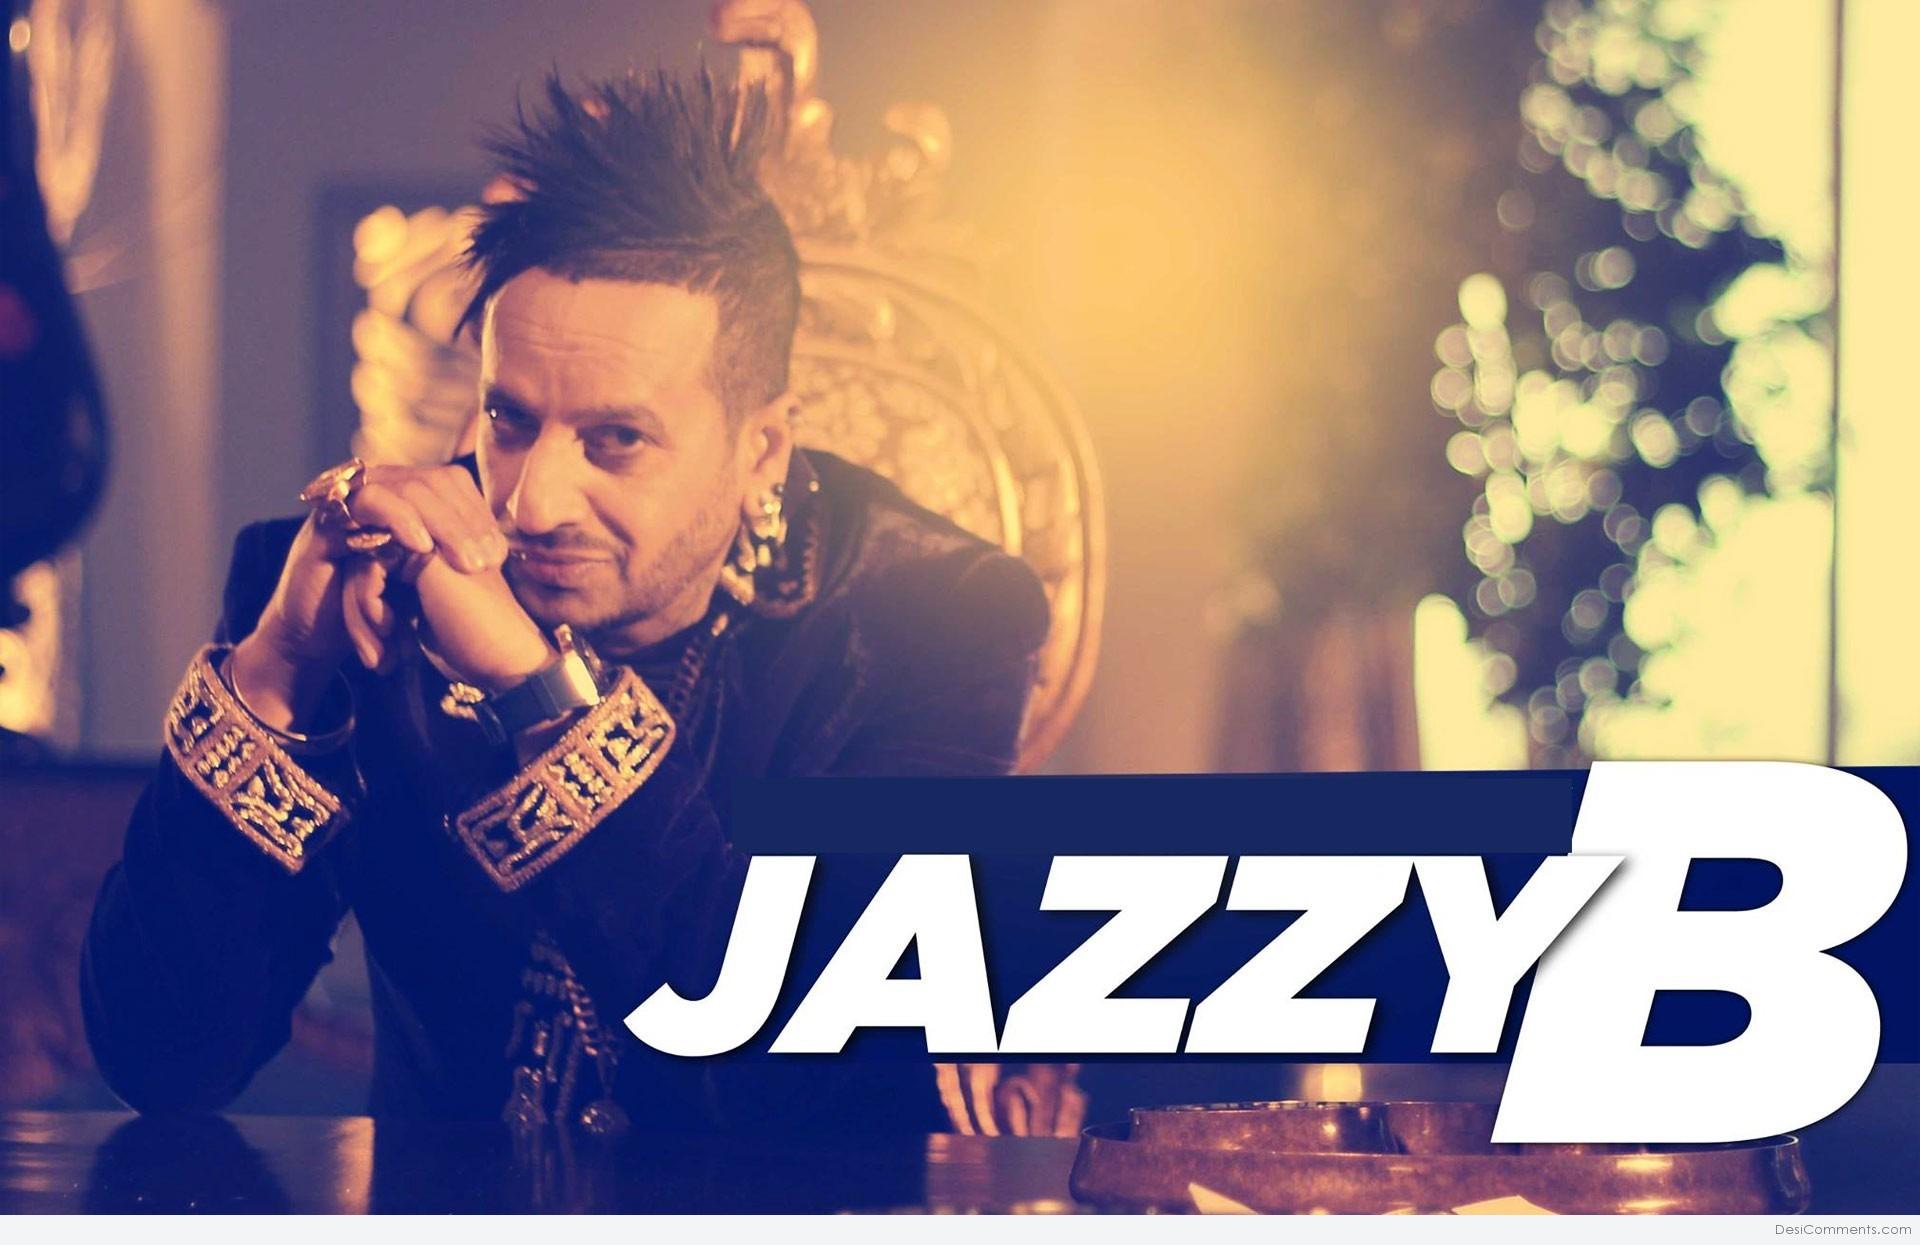 My Nightmare in a Jazzy B Hell - Page 3 - POLITICS | LIFESTYLE - SIKH SANGAT